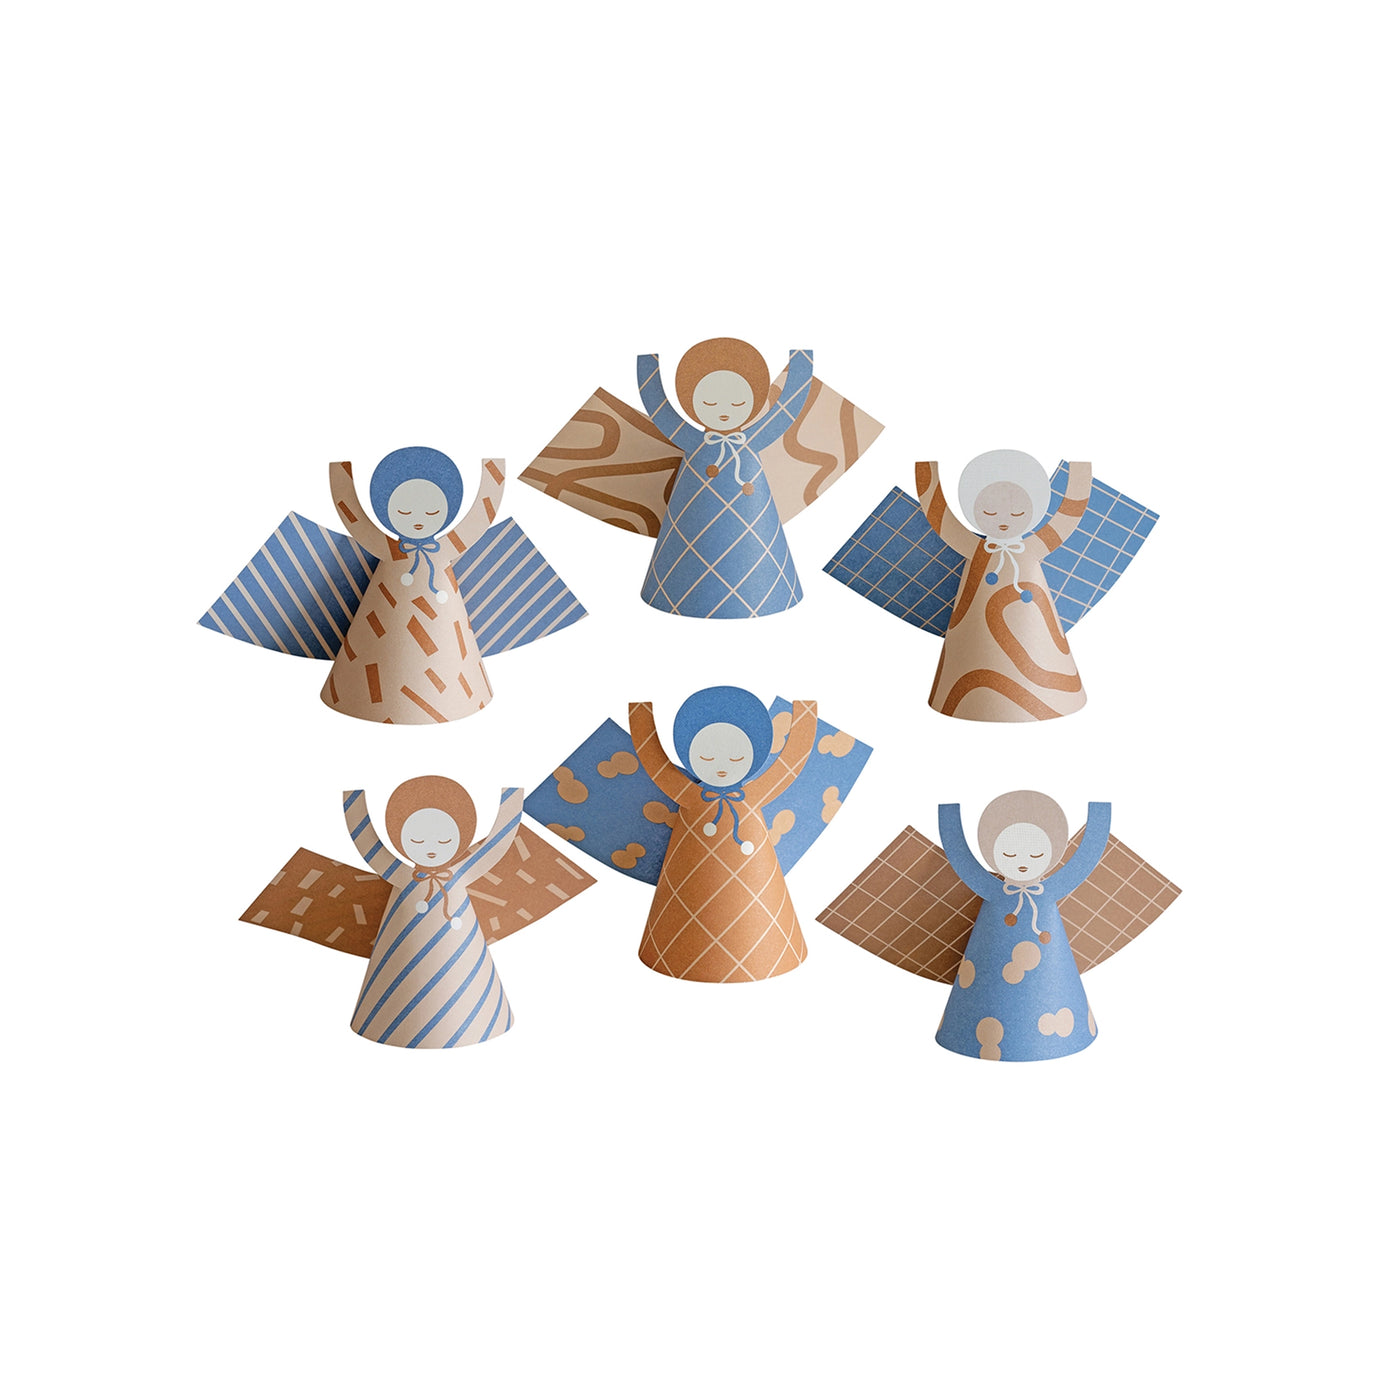 Angel Christmas Decorations - Pack of 6